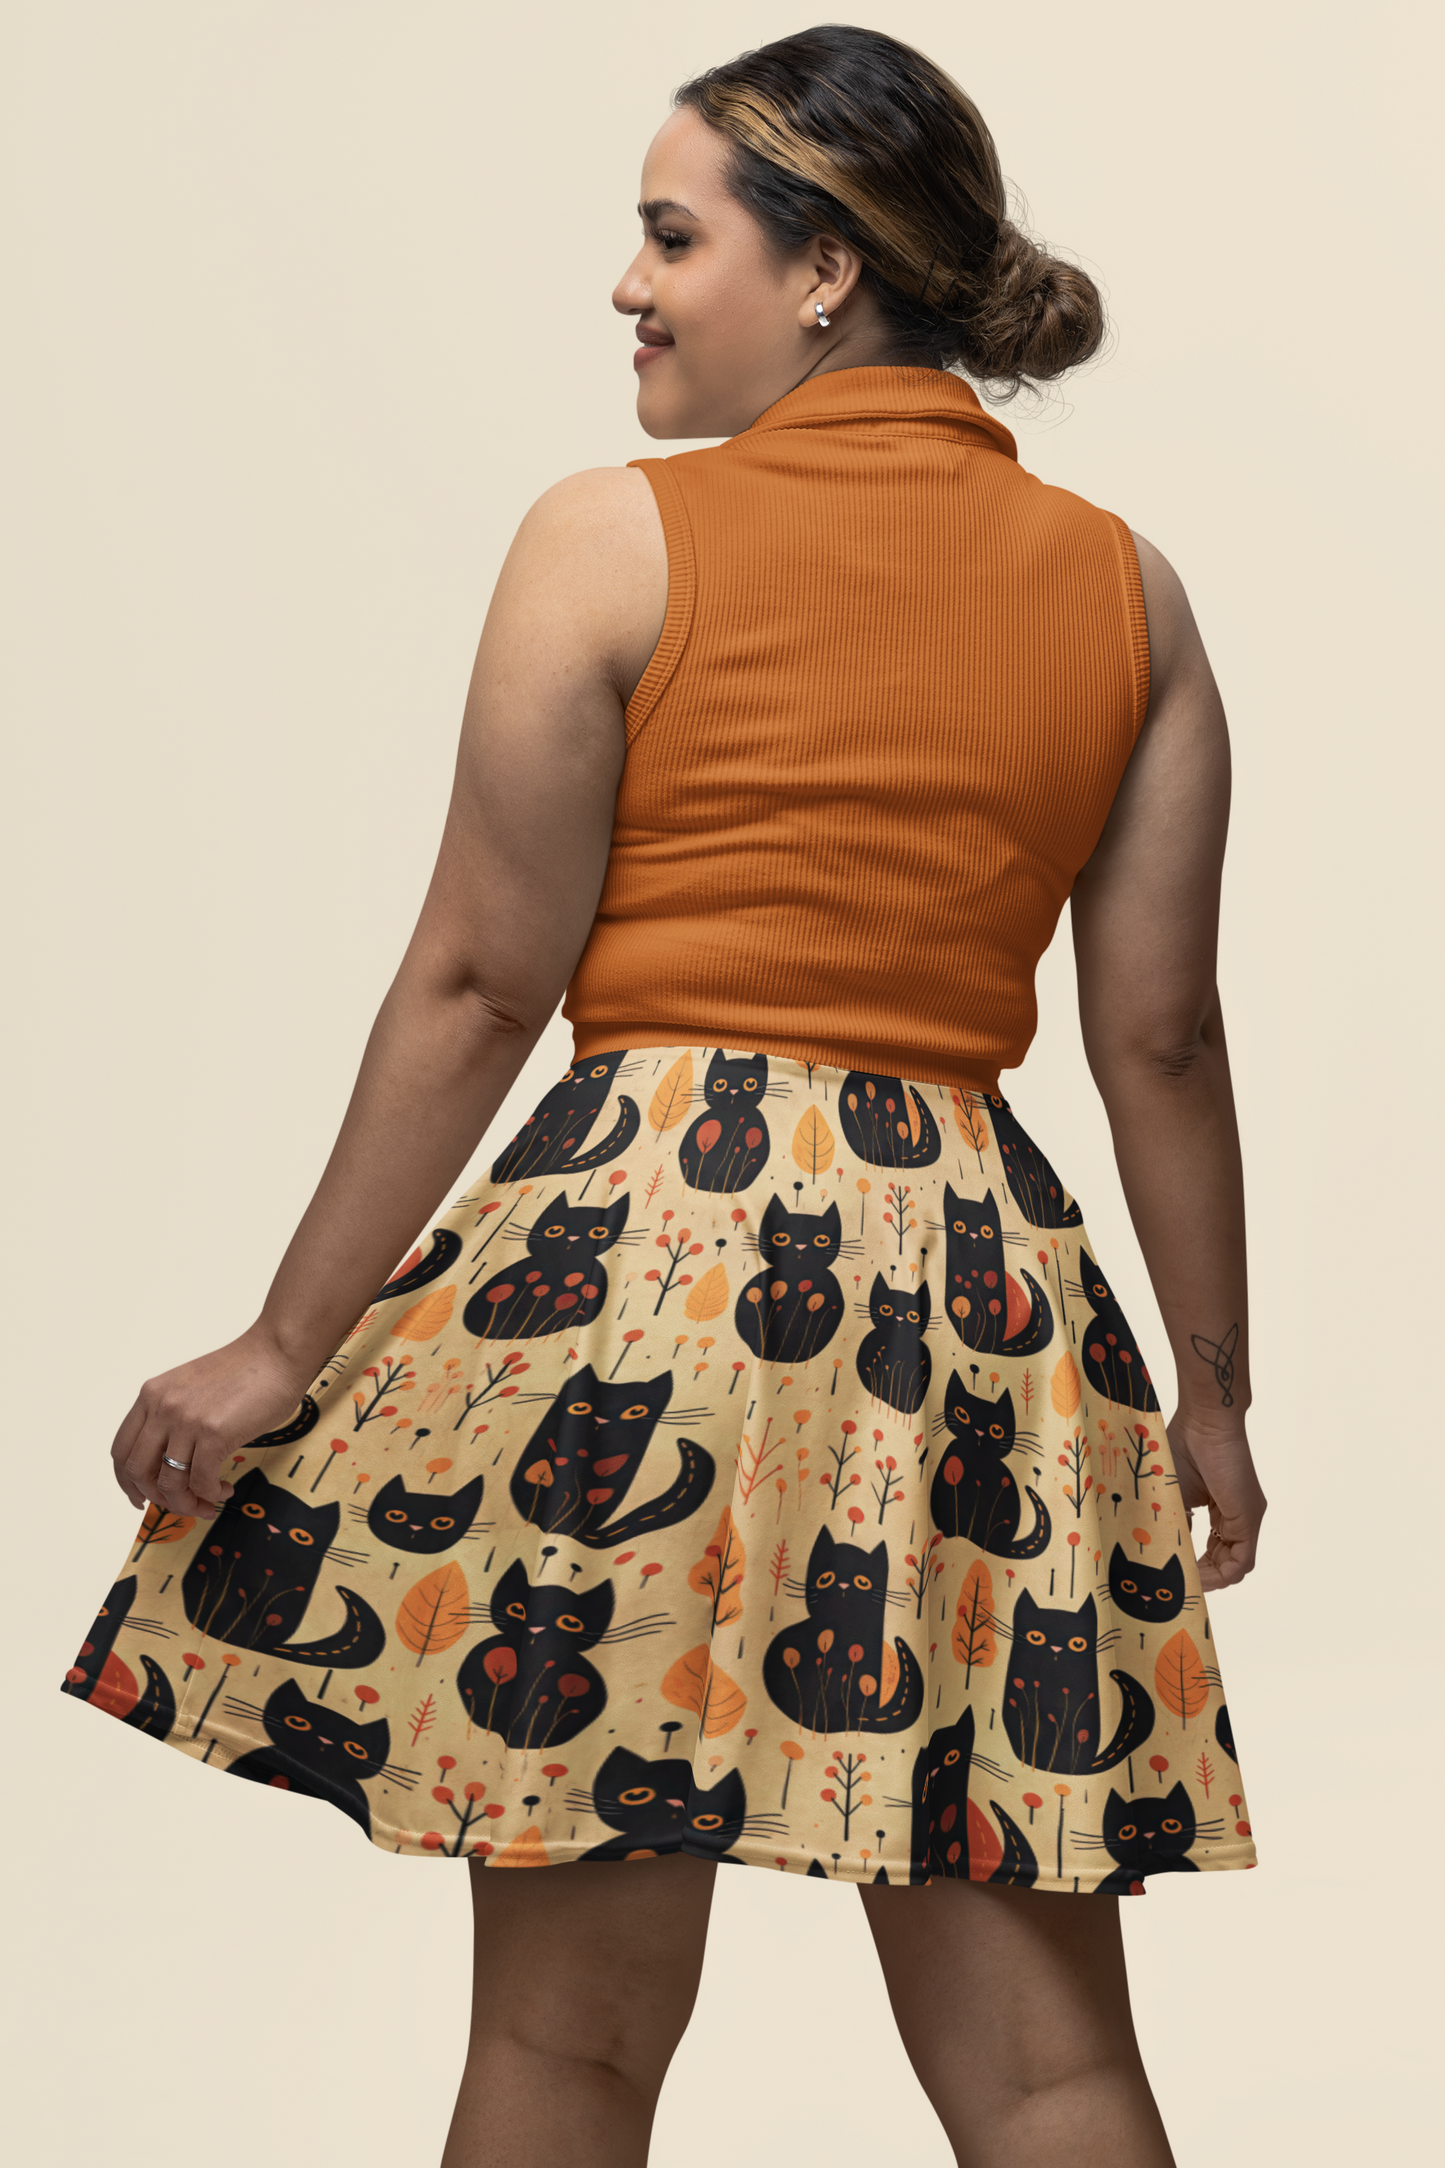 Cute Black Cats | Witchy Skirt | Magical Skirt | Yellow & Orange